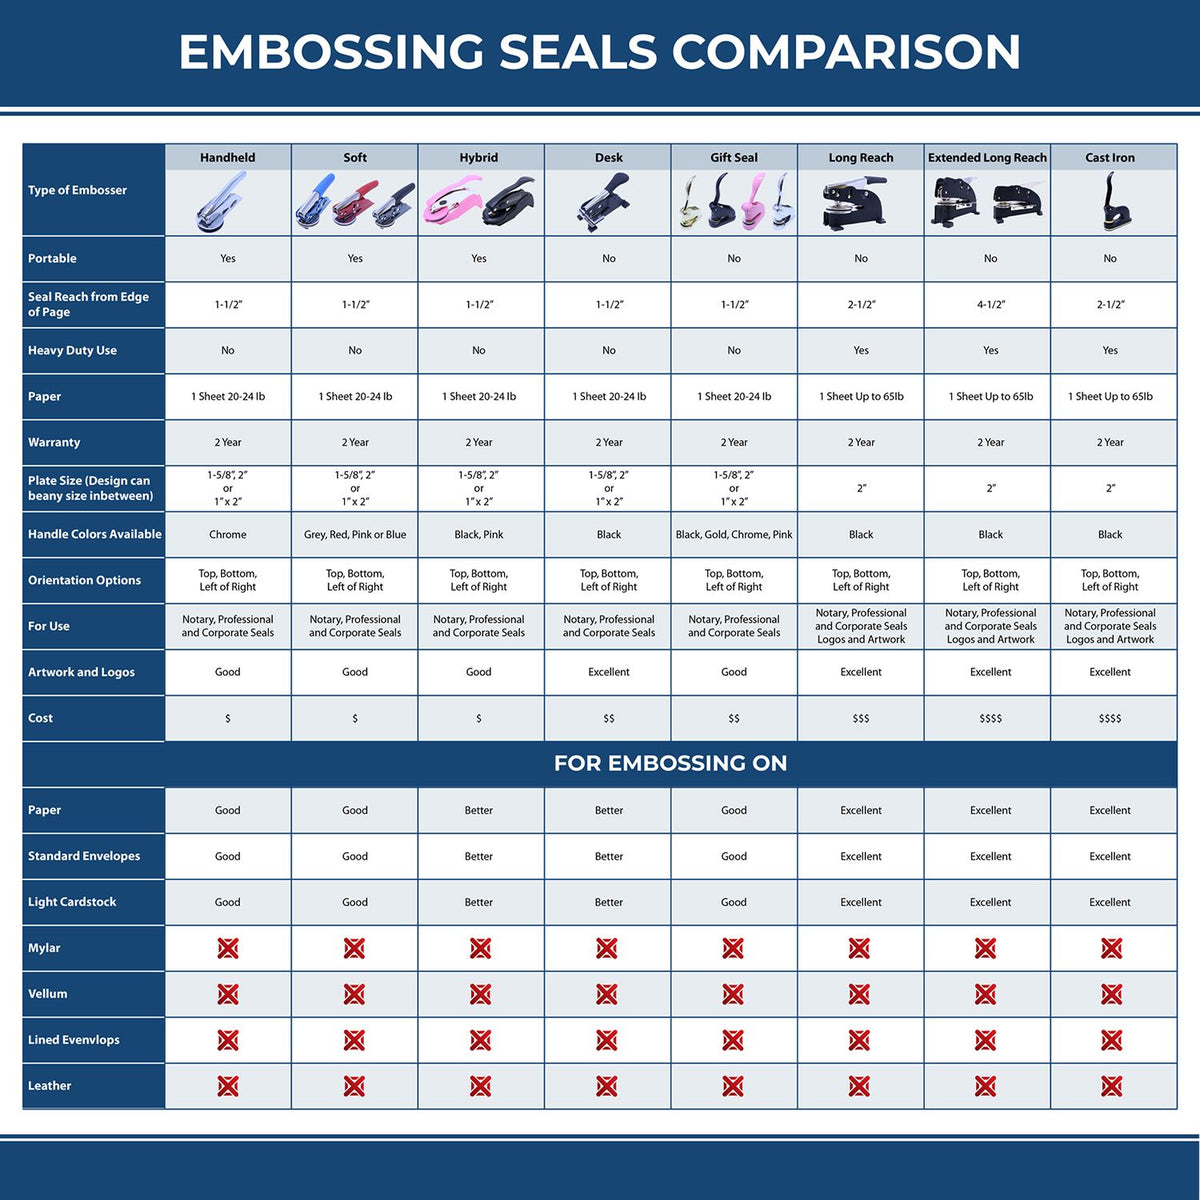 A comparison chart for the different types of mount models available for the Heavy Duty Cast Iron New York Engineer Seal Embosser.